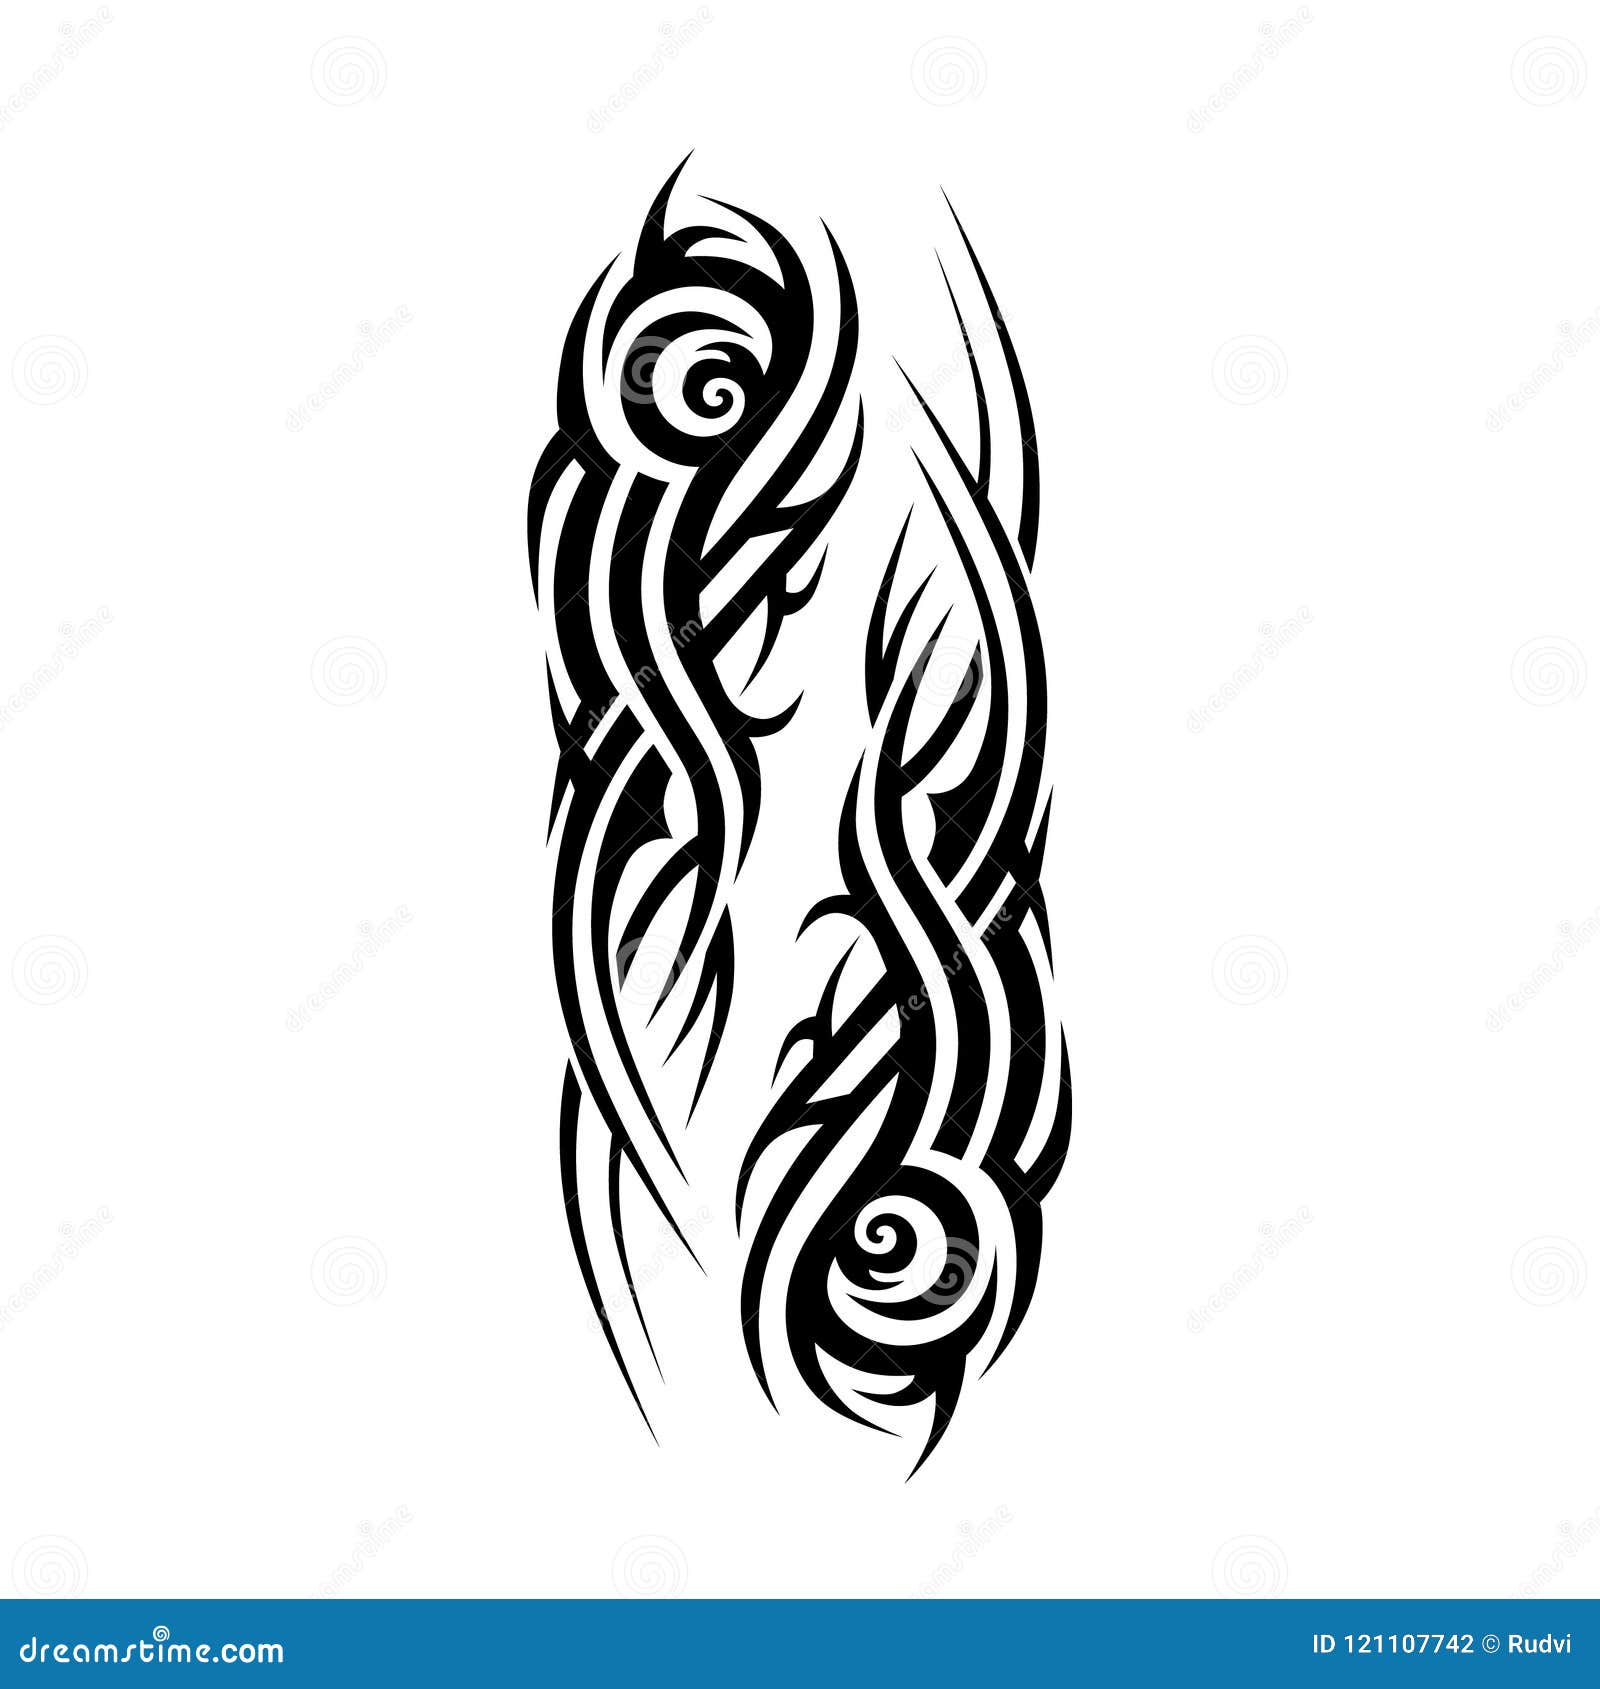 Fire flame tattoo stock vector. Illustration of background - 54882126